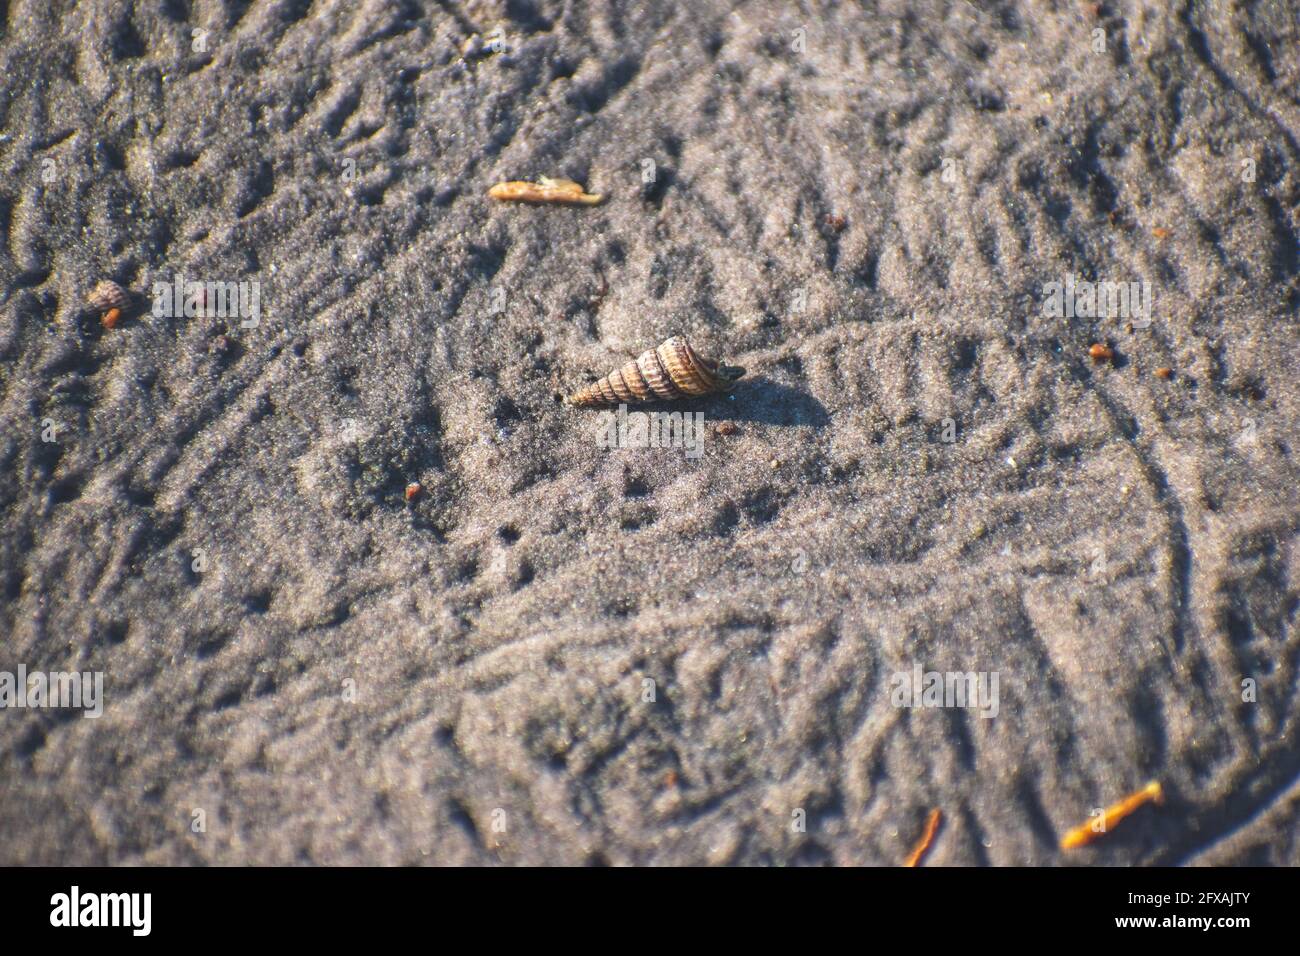 A small hermit crab crawls across the textured sand of a Florida ...